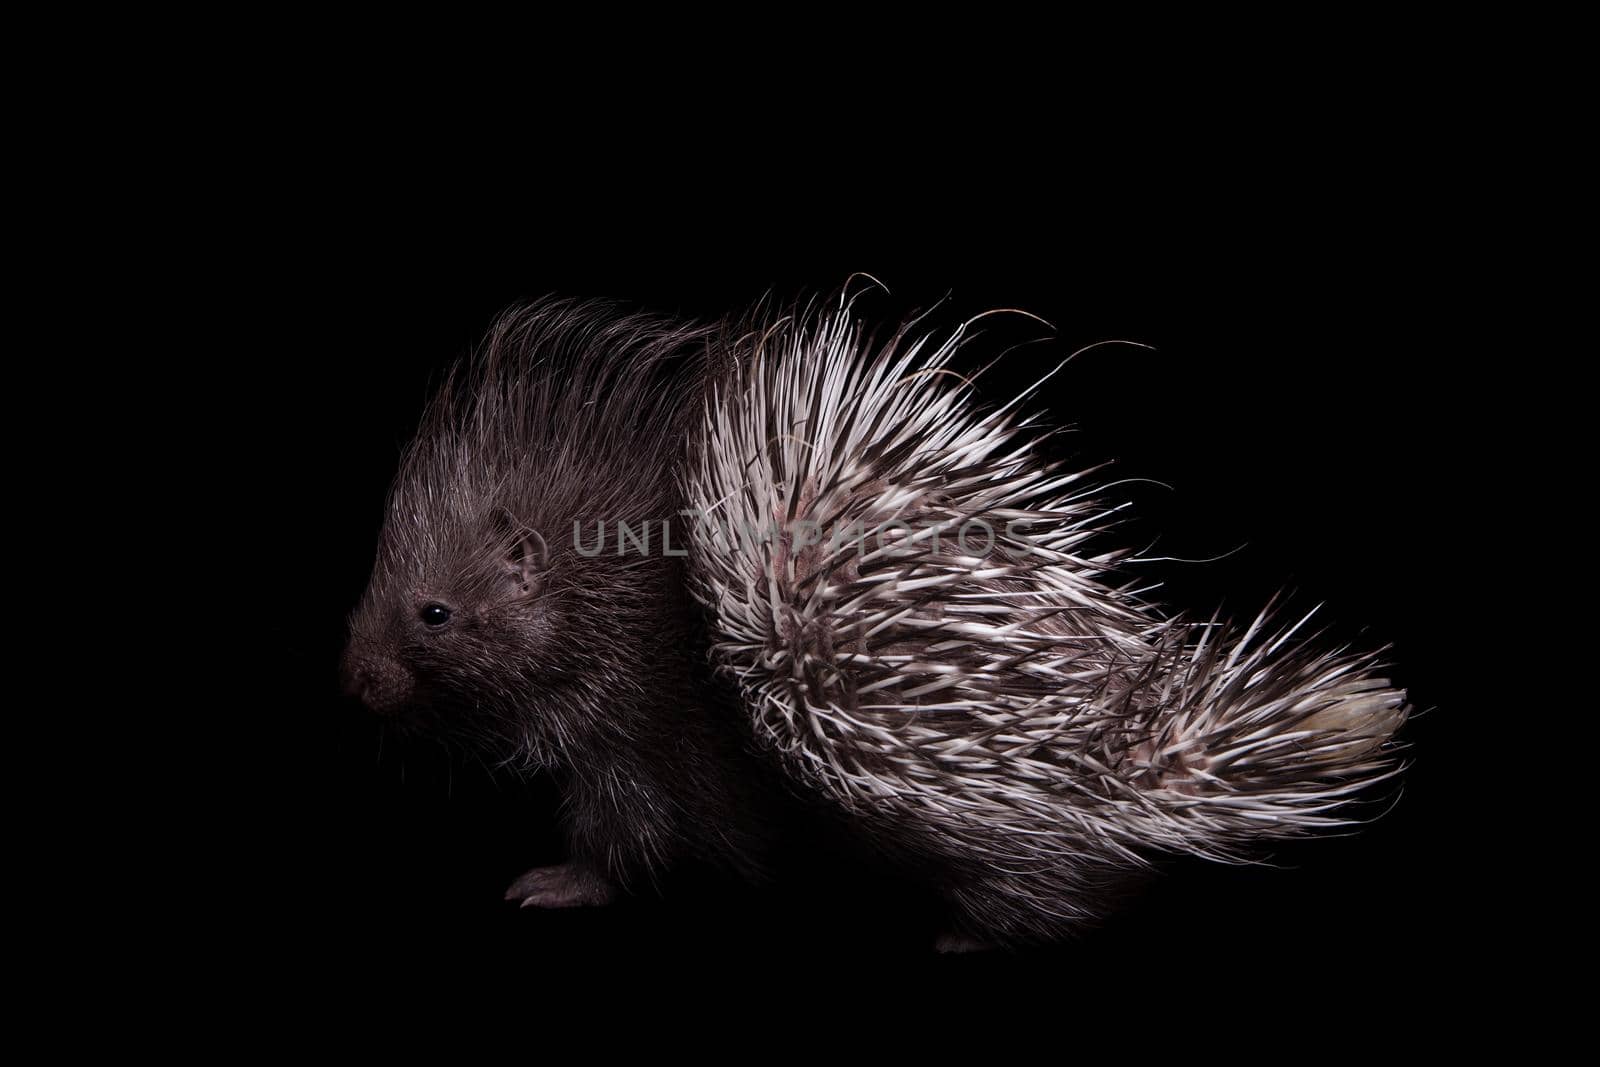 Indian crested Porcupine baby on black backgrond by RosaJay